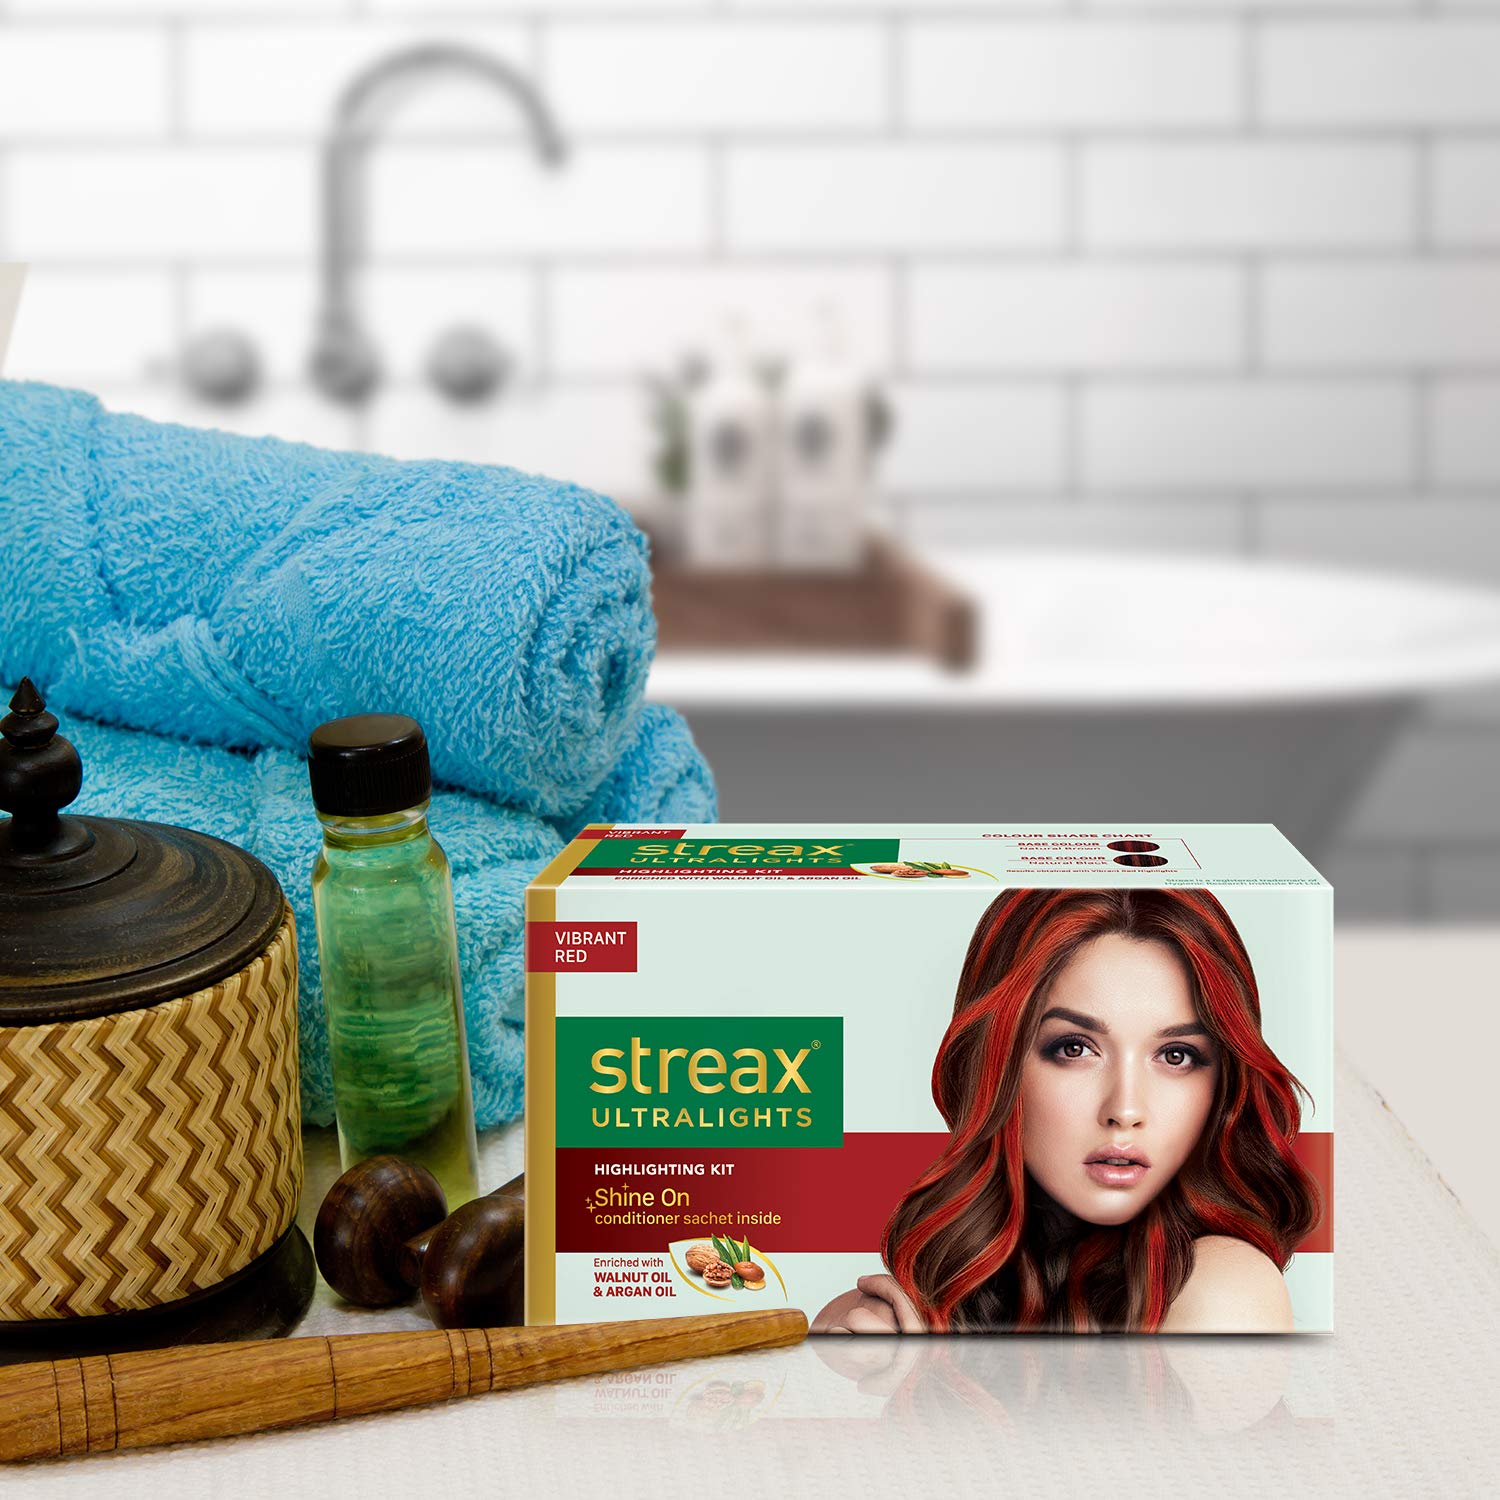 Streax Hair Ultralights Vibrant Red with Walnut Oil and Argan Oil 60g  CLEARANCE SALE! EXP 06/2021 | Lazada PH